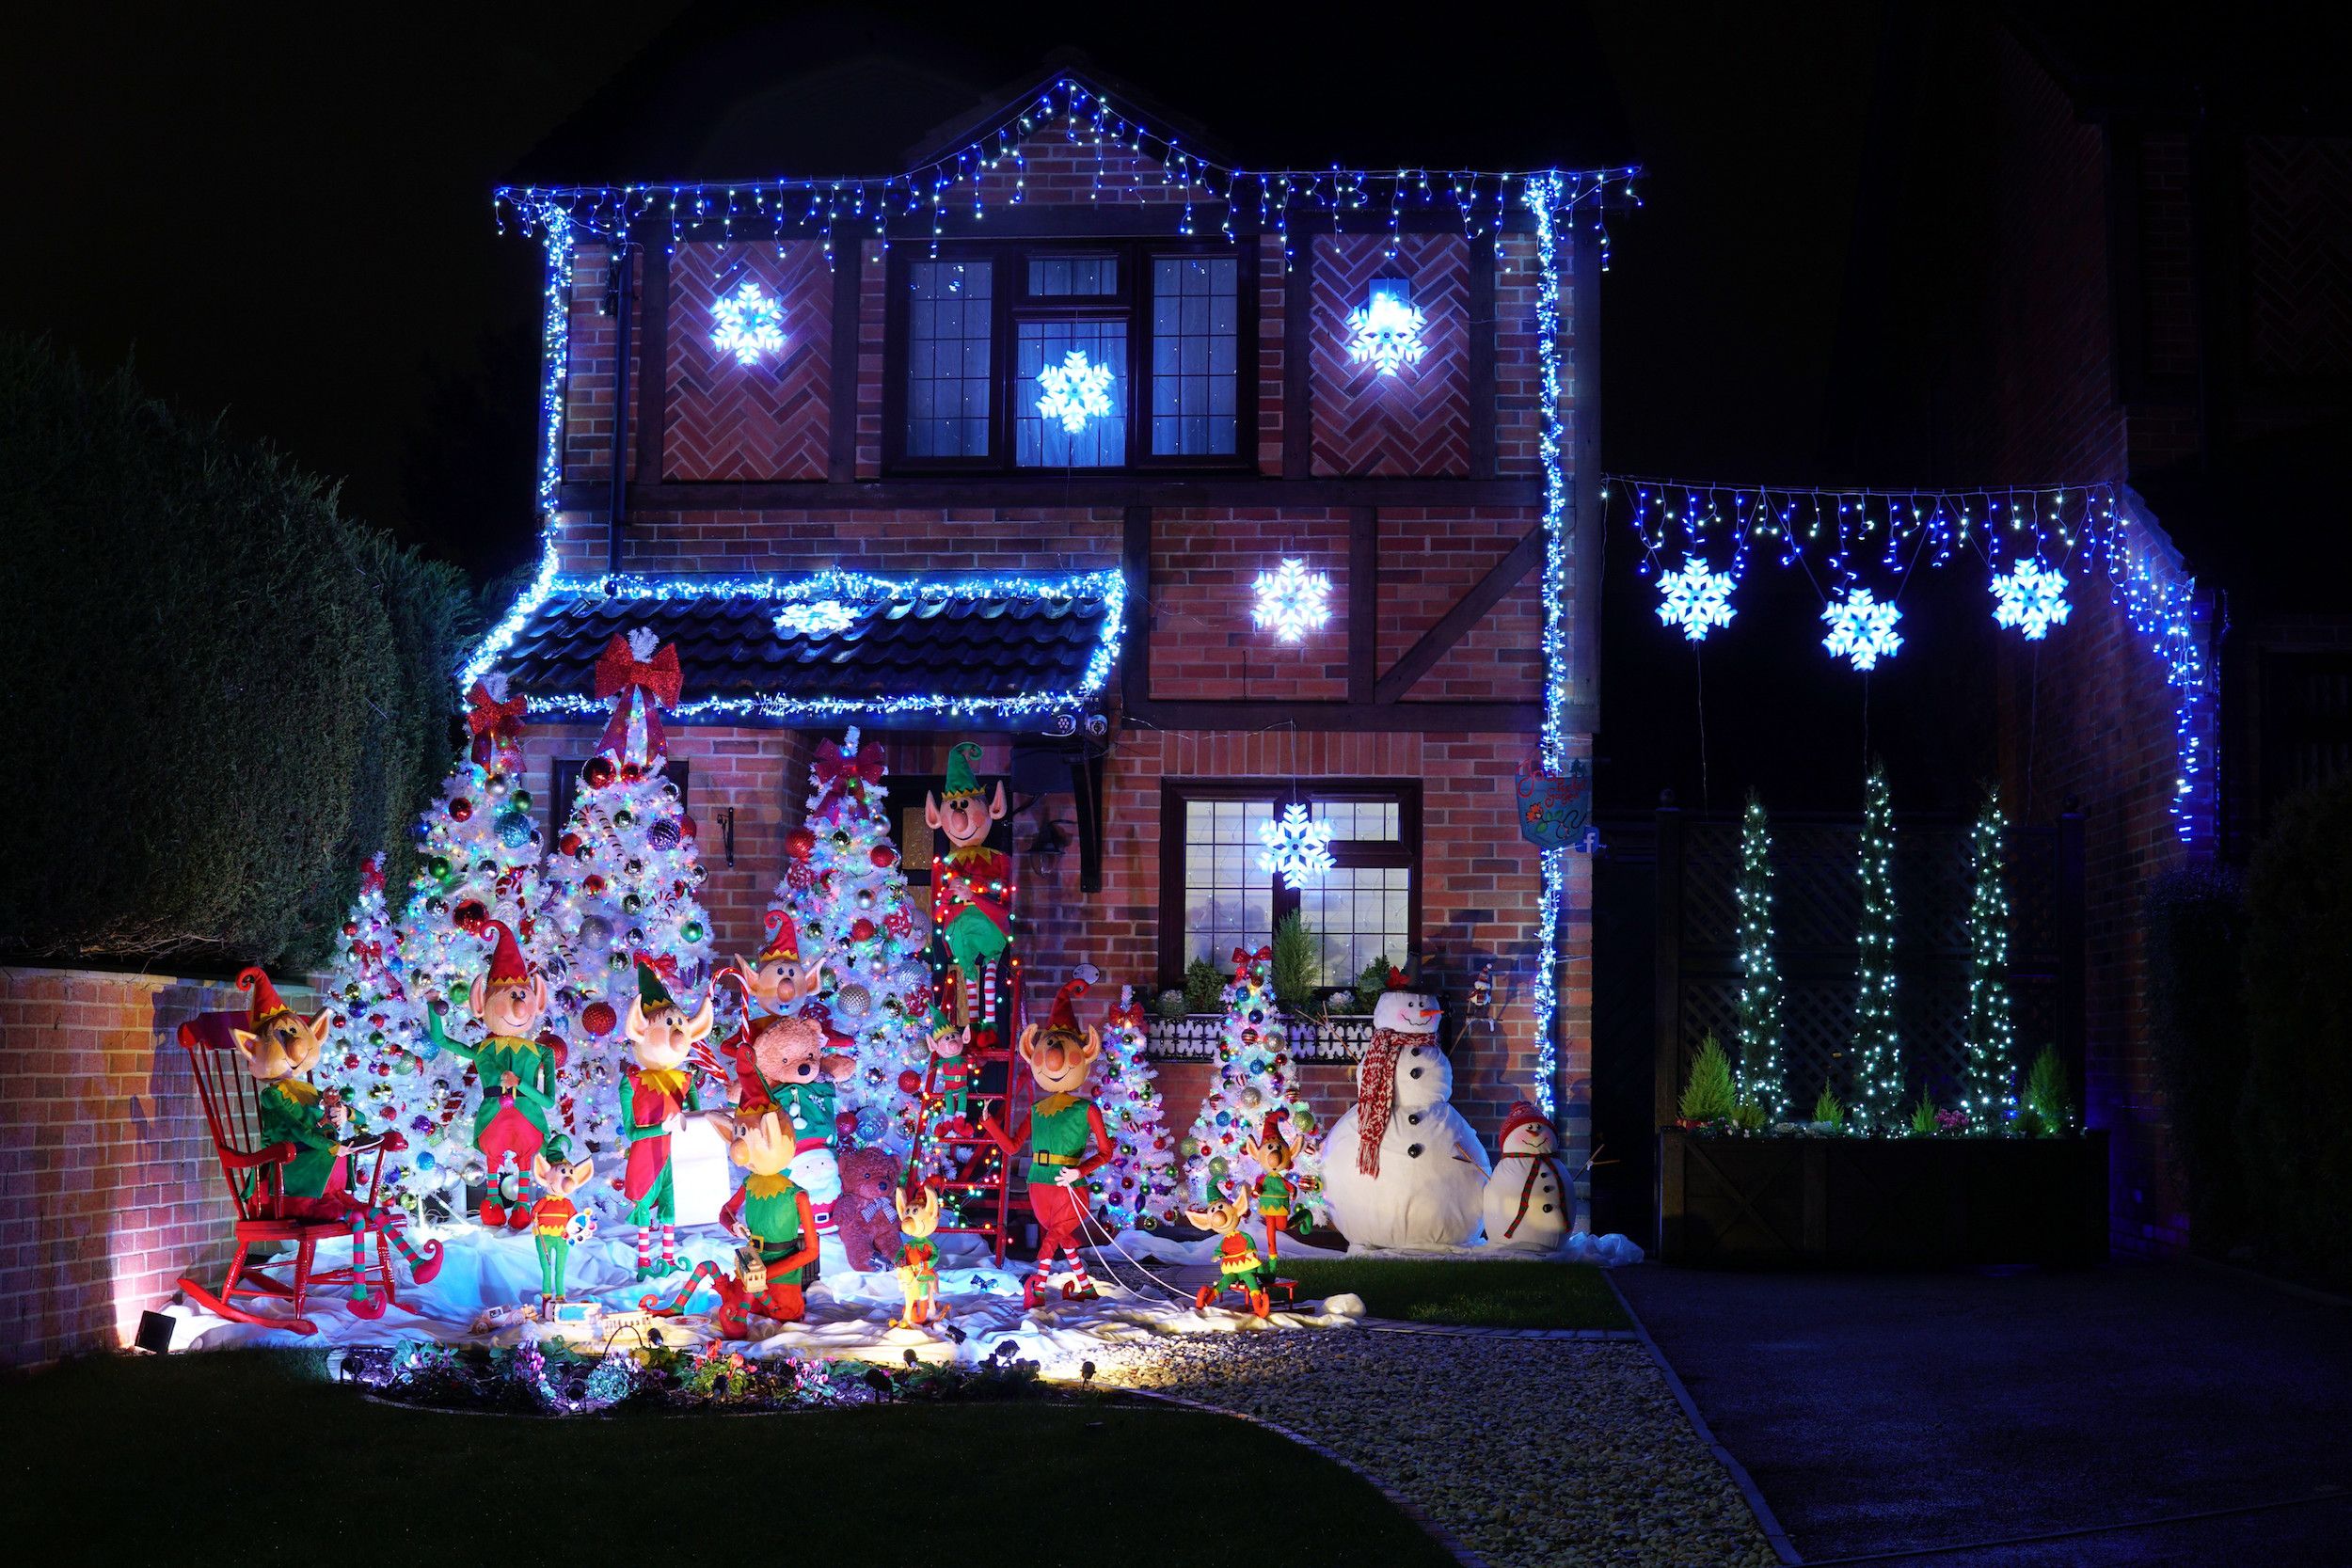 Zoopla Crowns House In Reading As Most Festive Home In UK